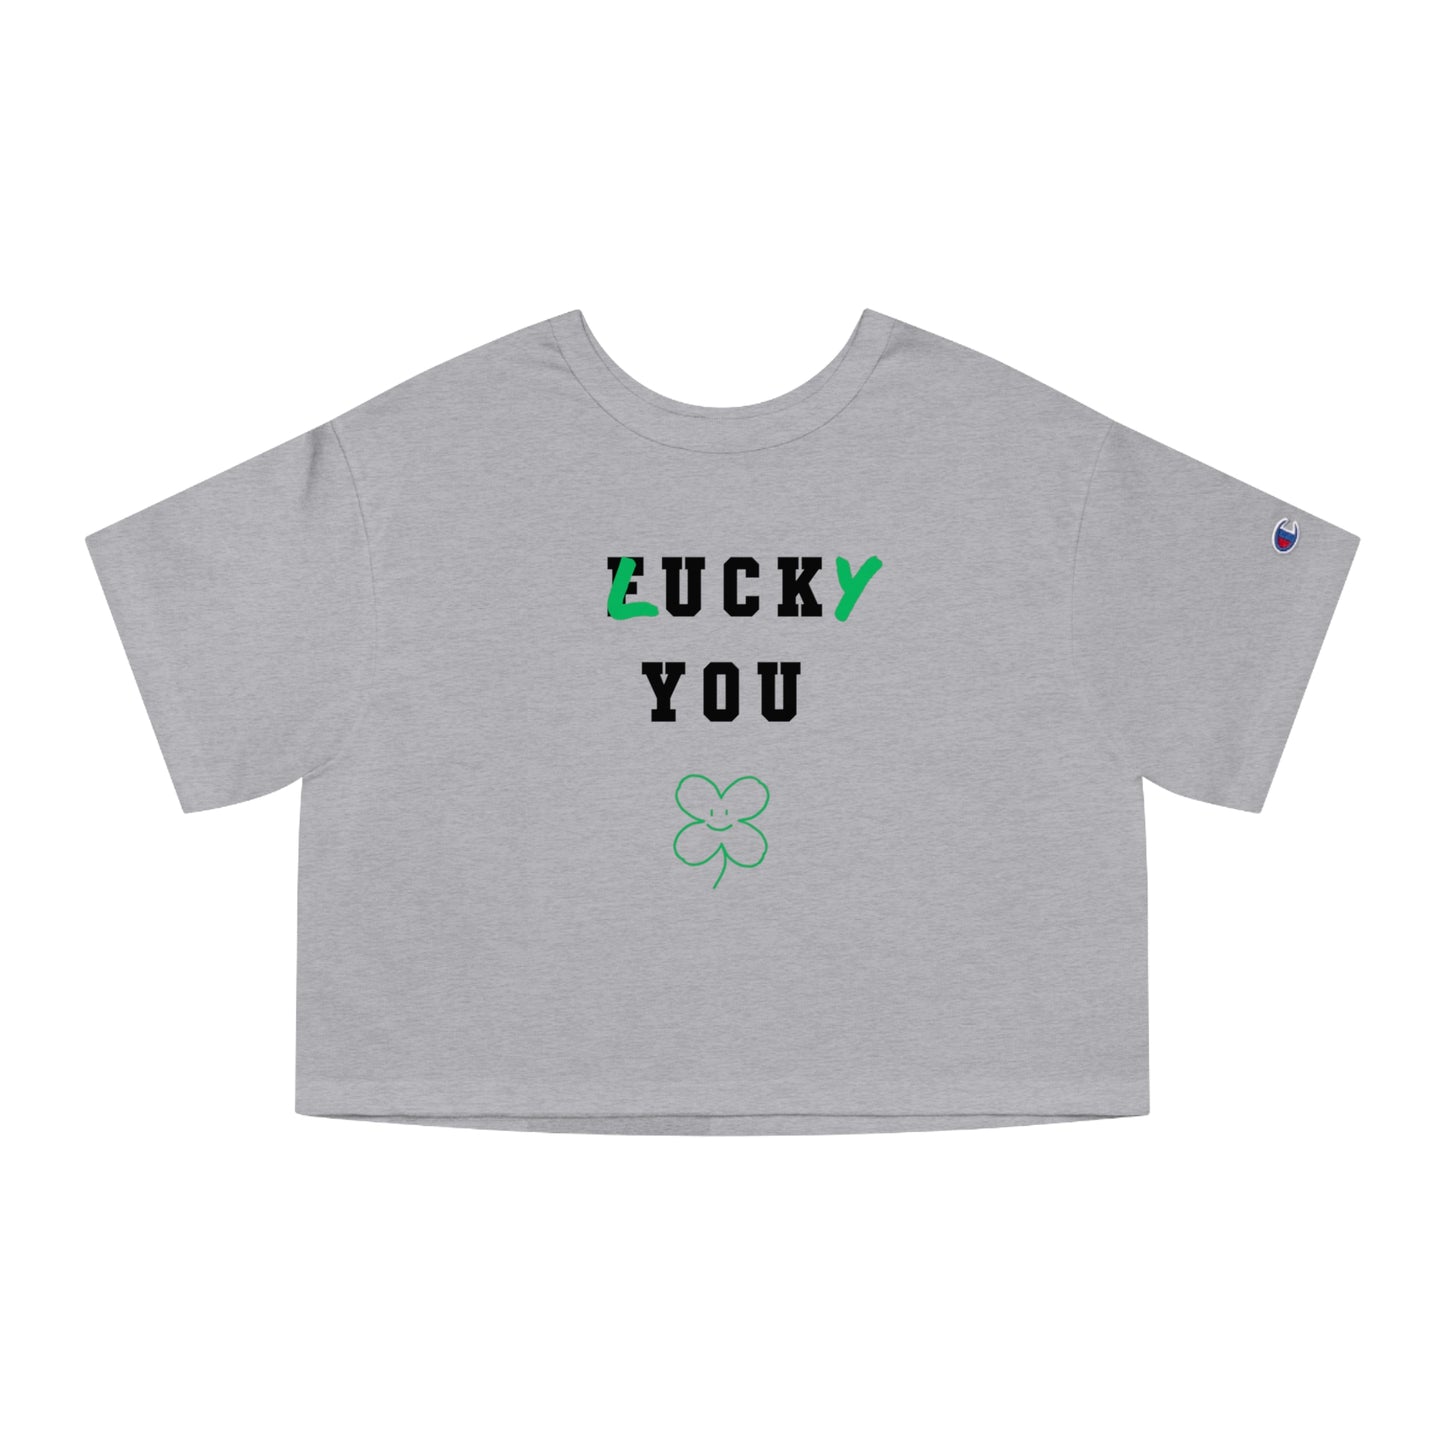 "Lucky you" - Champion crop top